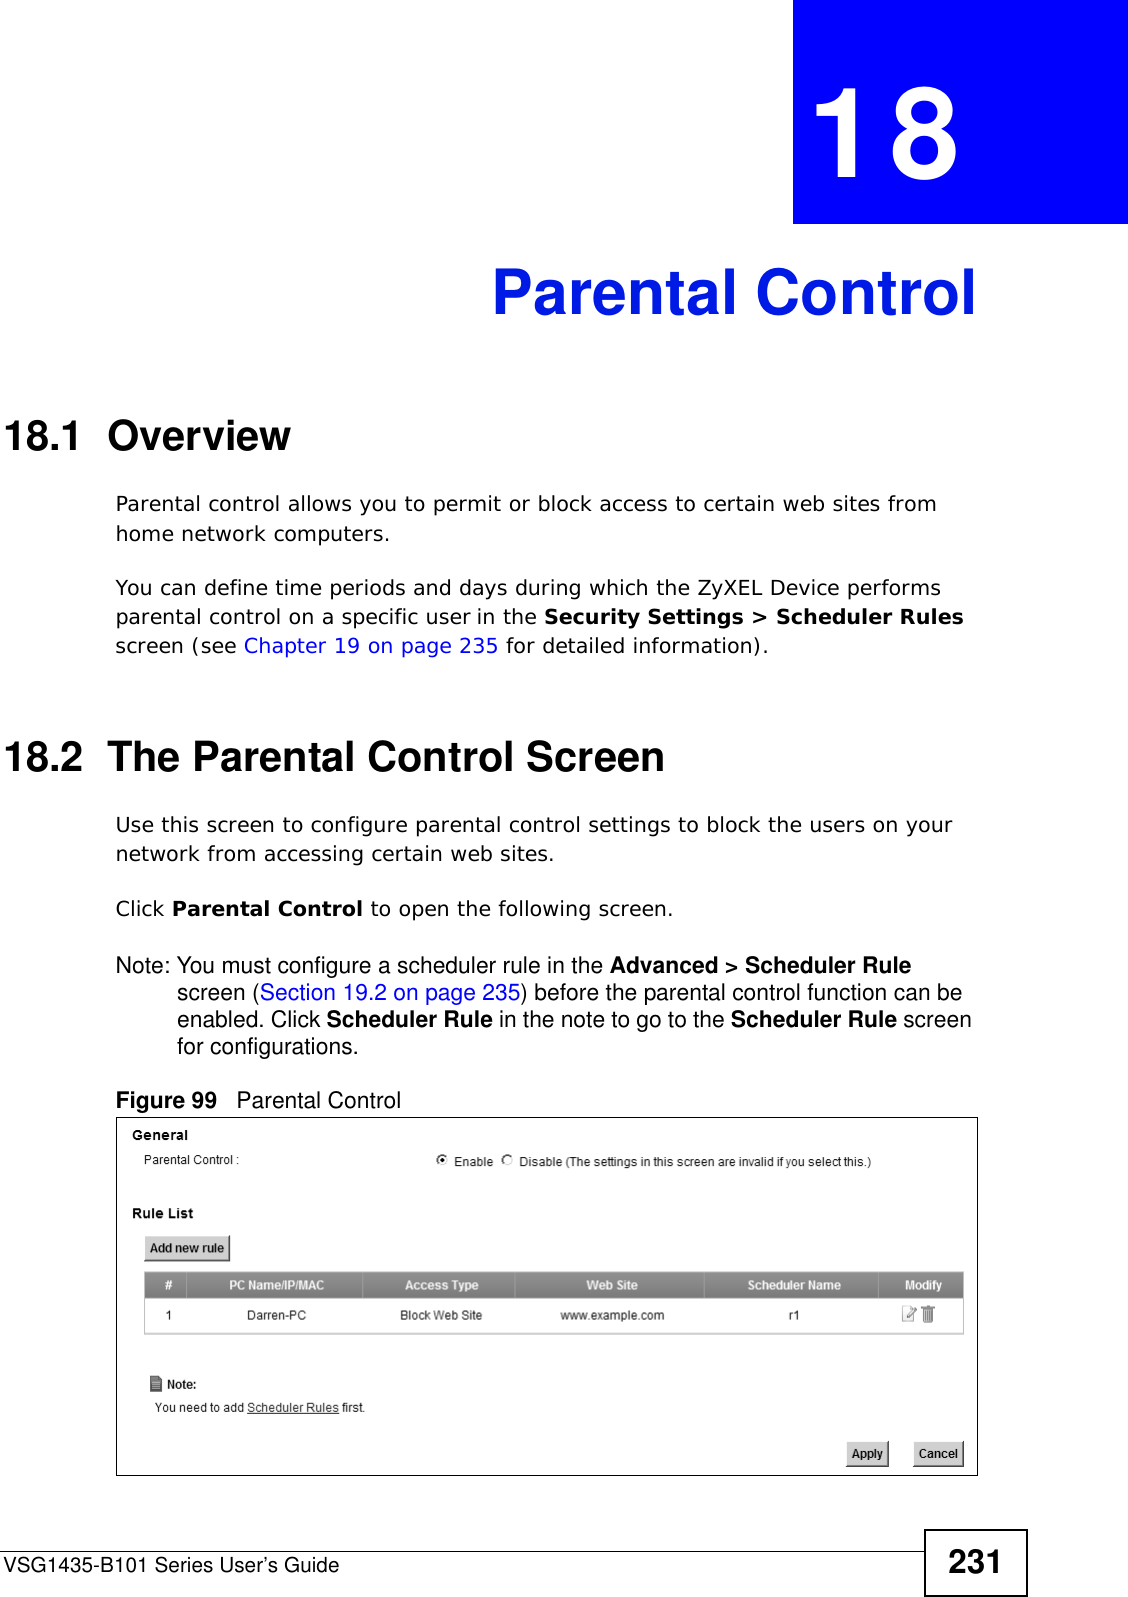 VSG1435-B101 Series User’s Guide 231CHAPTER  18 Parental Control18.1  OverviewParental control allows you to permit or block access to certain web sites from home network computers. You can define time periods and days during which the ZyXEL Device performs parental control on a specific user in the Security Settings &gt; Scheduler Rules screen (see Chapter 19 on page 235 for detailed information). 18.2  The Parental Control ScreenUse this screen to configure parental control settings to block the users on your network from accessing certain web sites.Click Parental Control to open the following screen. Note: You must configure a scheduler rule in the Advanced &gt; Scheduler Rule screen (Section 19.2 on page 235) before the parental control function can be enabled. Click Scheduler Rule in the note to go to the Scheduler Rule screen for configurations. Figure 99   Parental Control  